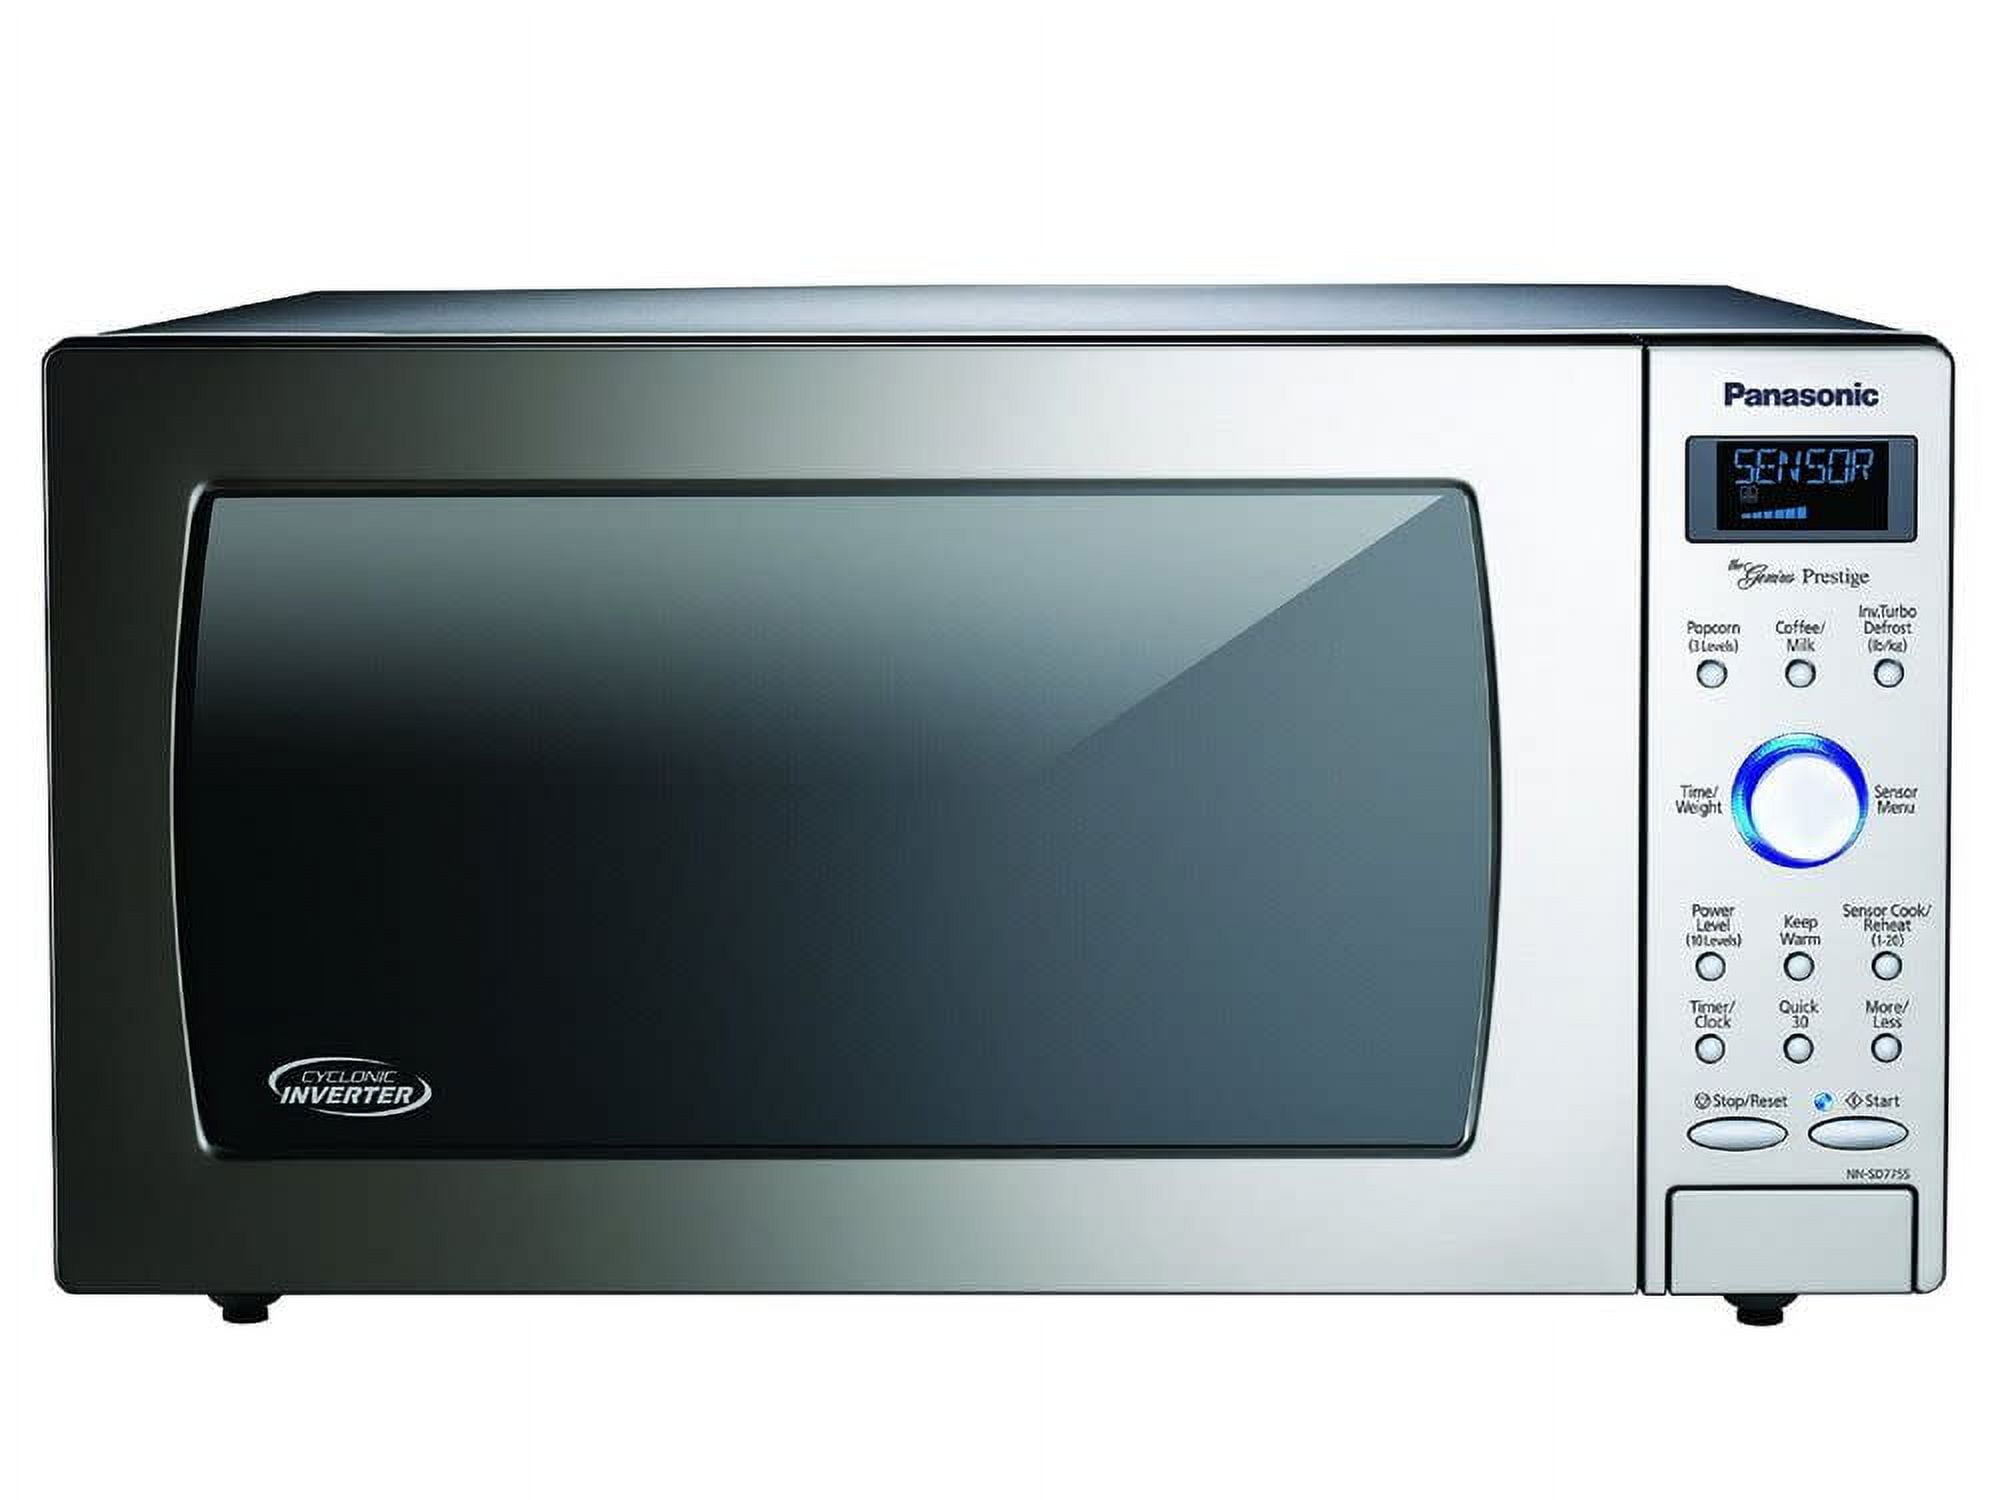 Picture of Panasonic NN-SD775S 1.6 cu. ft. Built-In & Countertop Cyclonic Wave Microwave Oven with Inverter Technology